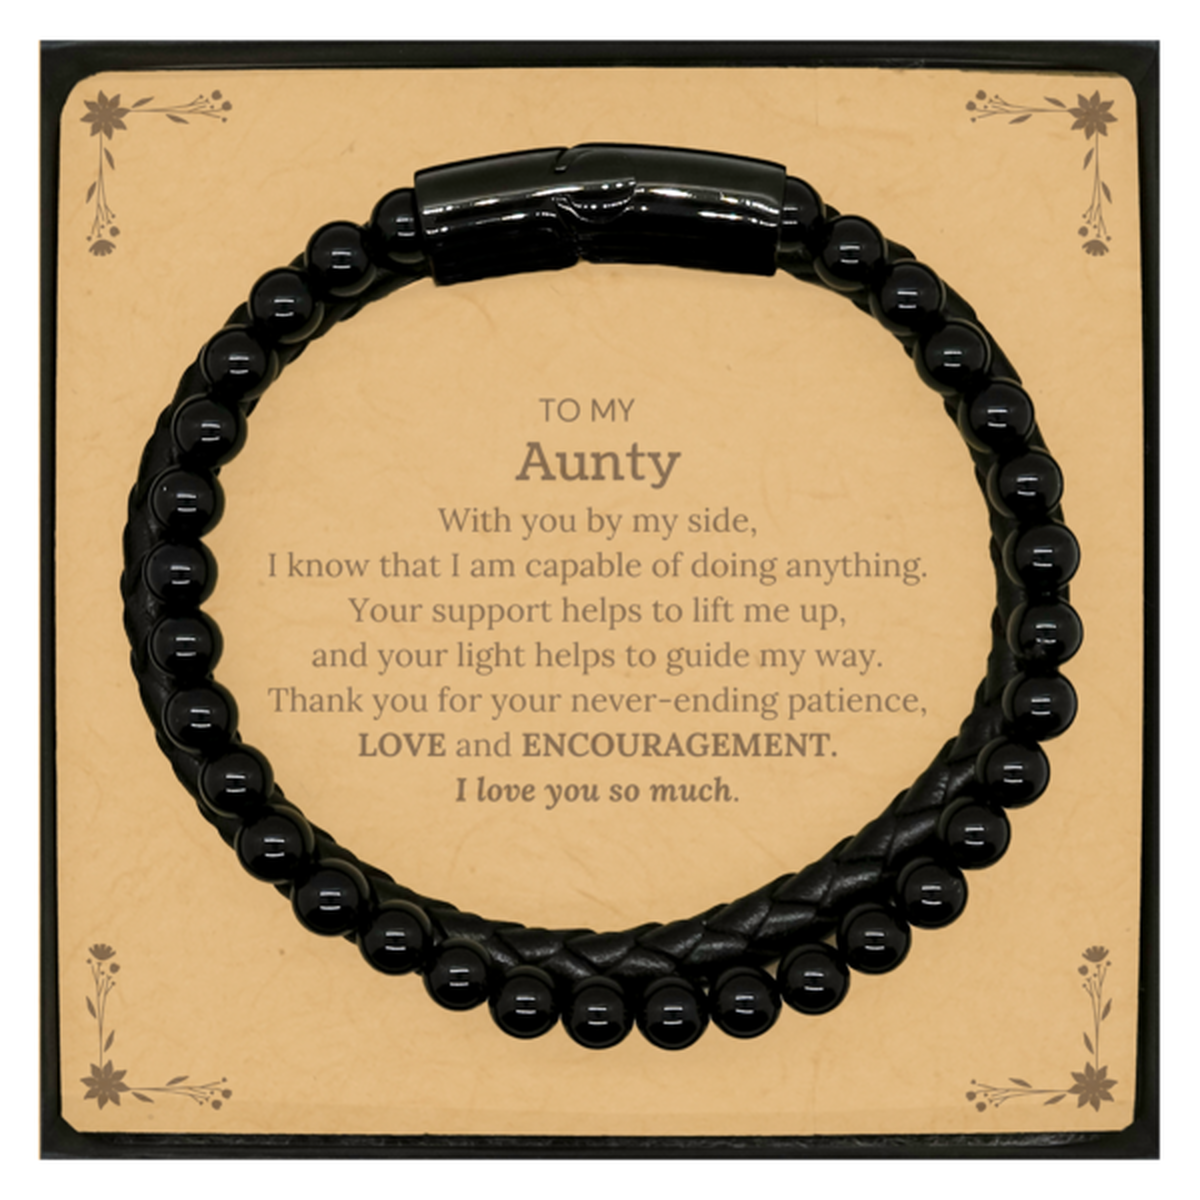 Appreciation Aunty Stone Leather Bracelets Gifts, To My Aunty Birthday Christmas Wedding Keepsake Gifts for Aunty With you by my side, I know that I am capable of doing anything. I love you so much